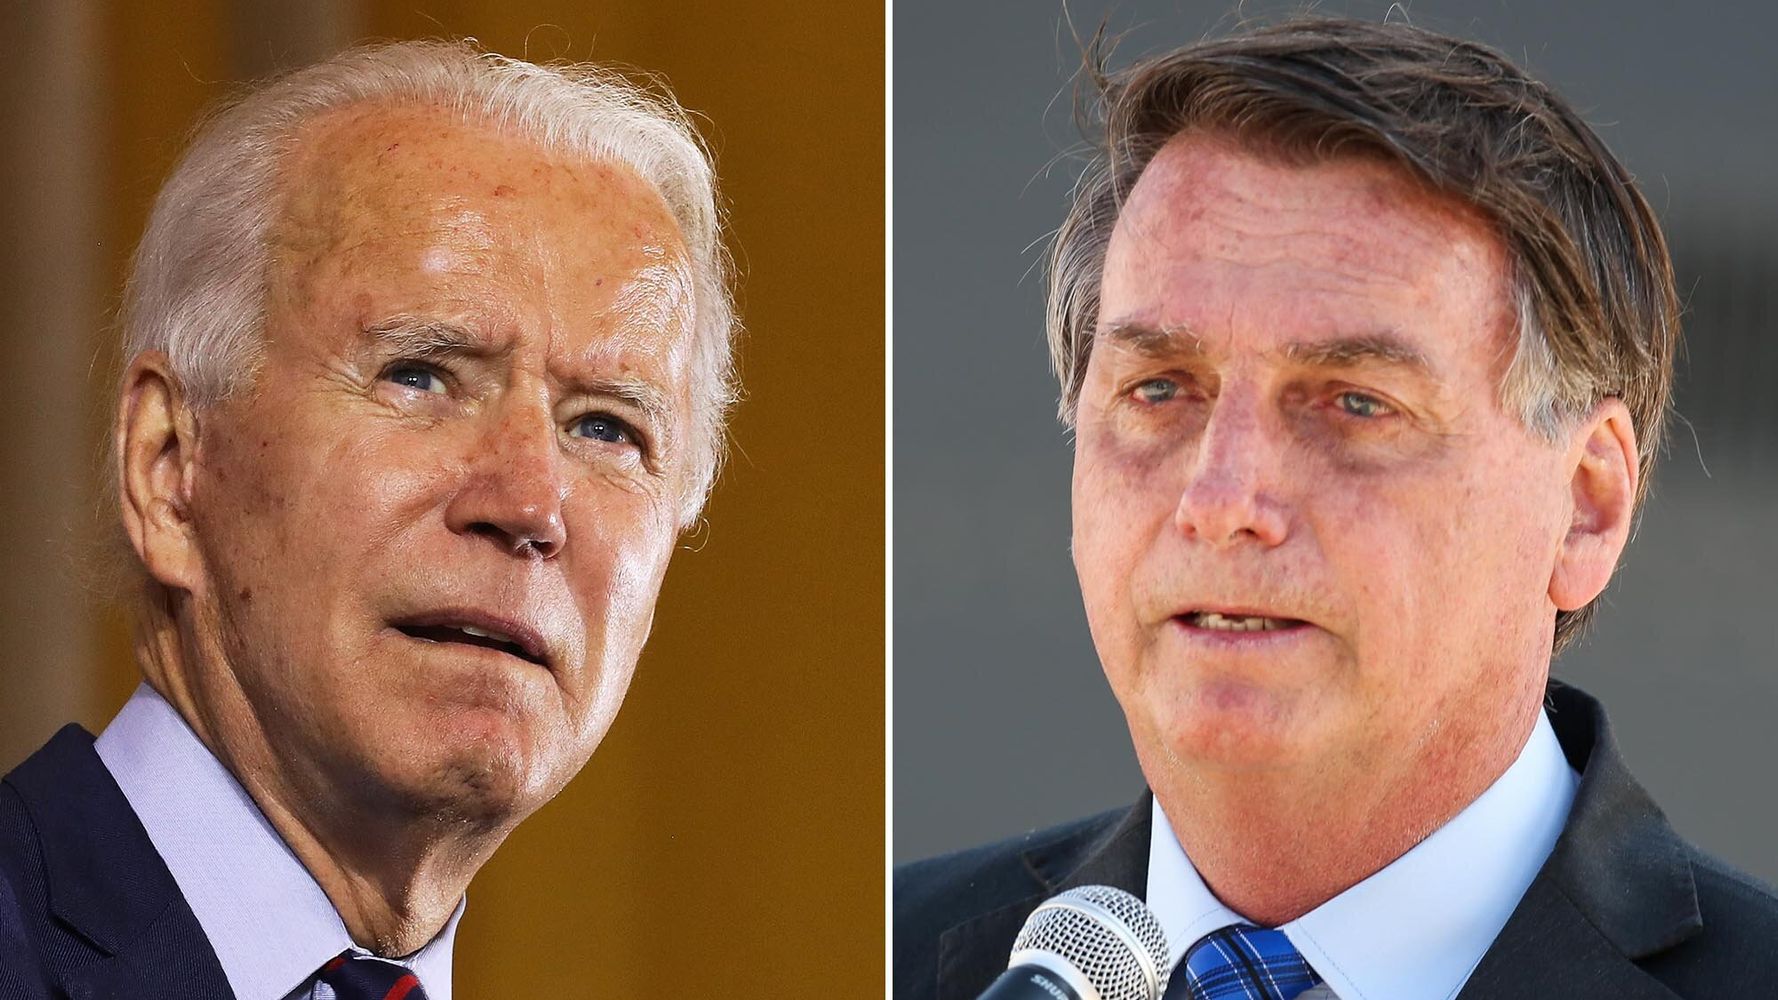 Biden’s Approach To Brazil’s Bolsonaro Could Prove He’s Serious About Climate Change